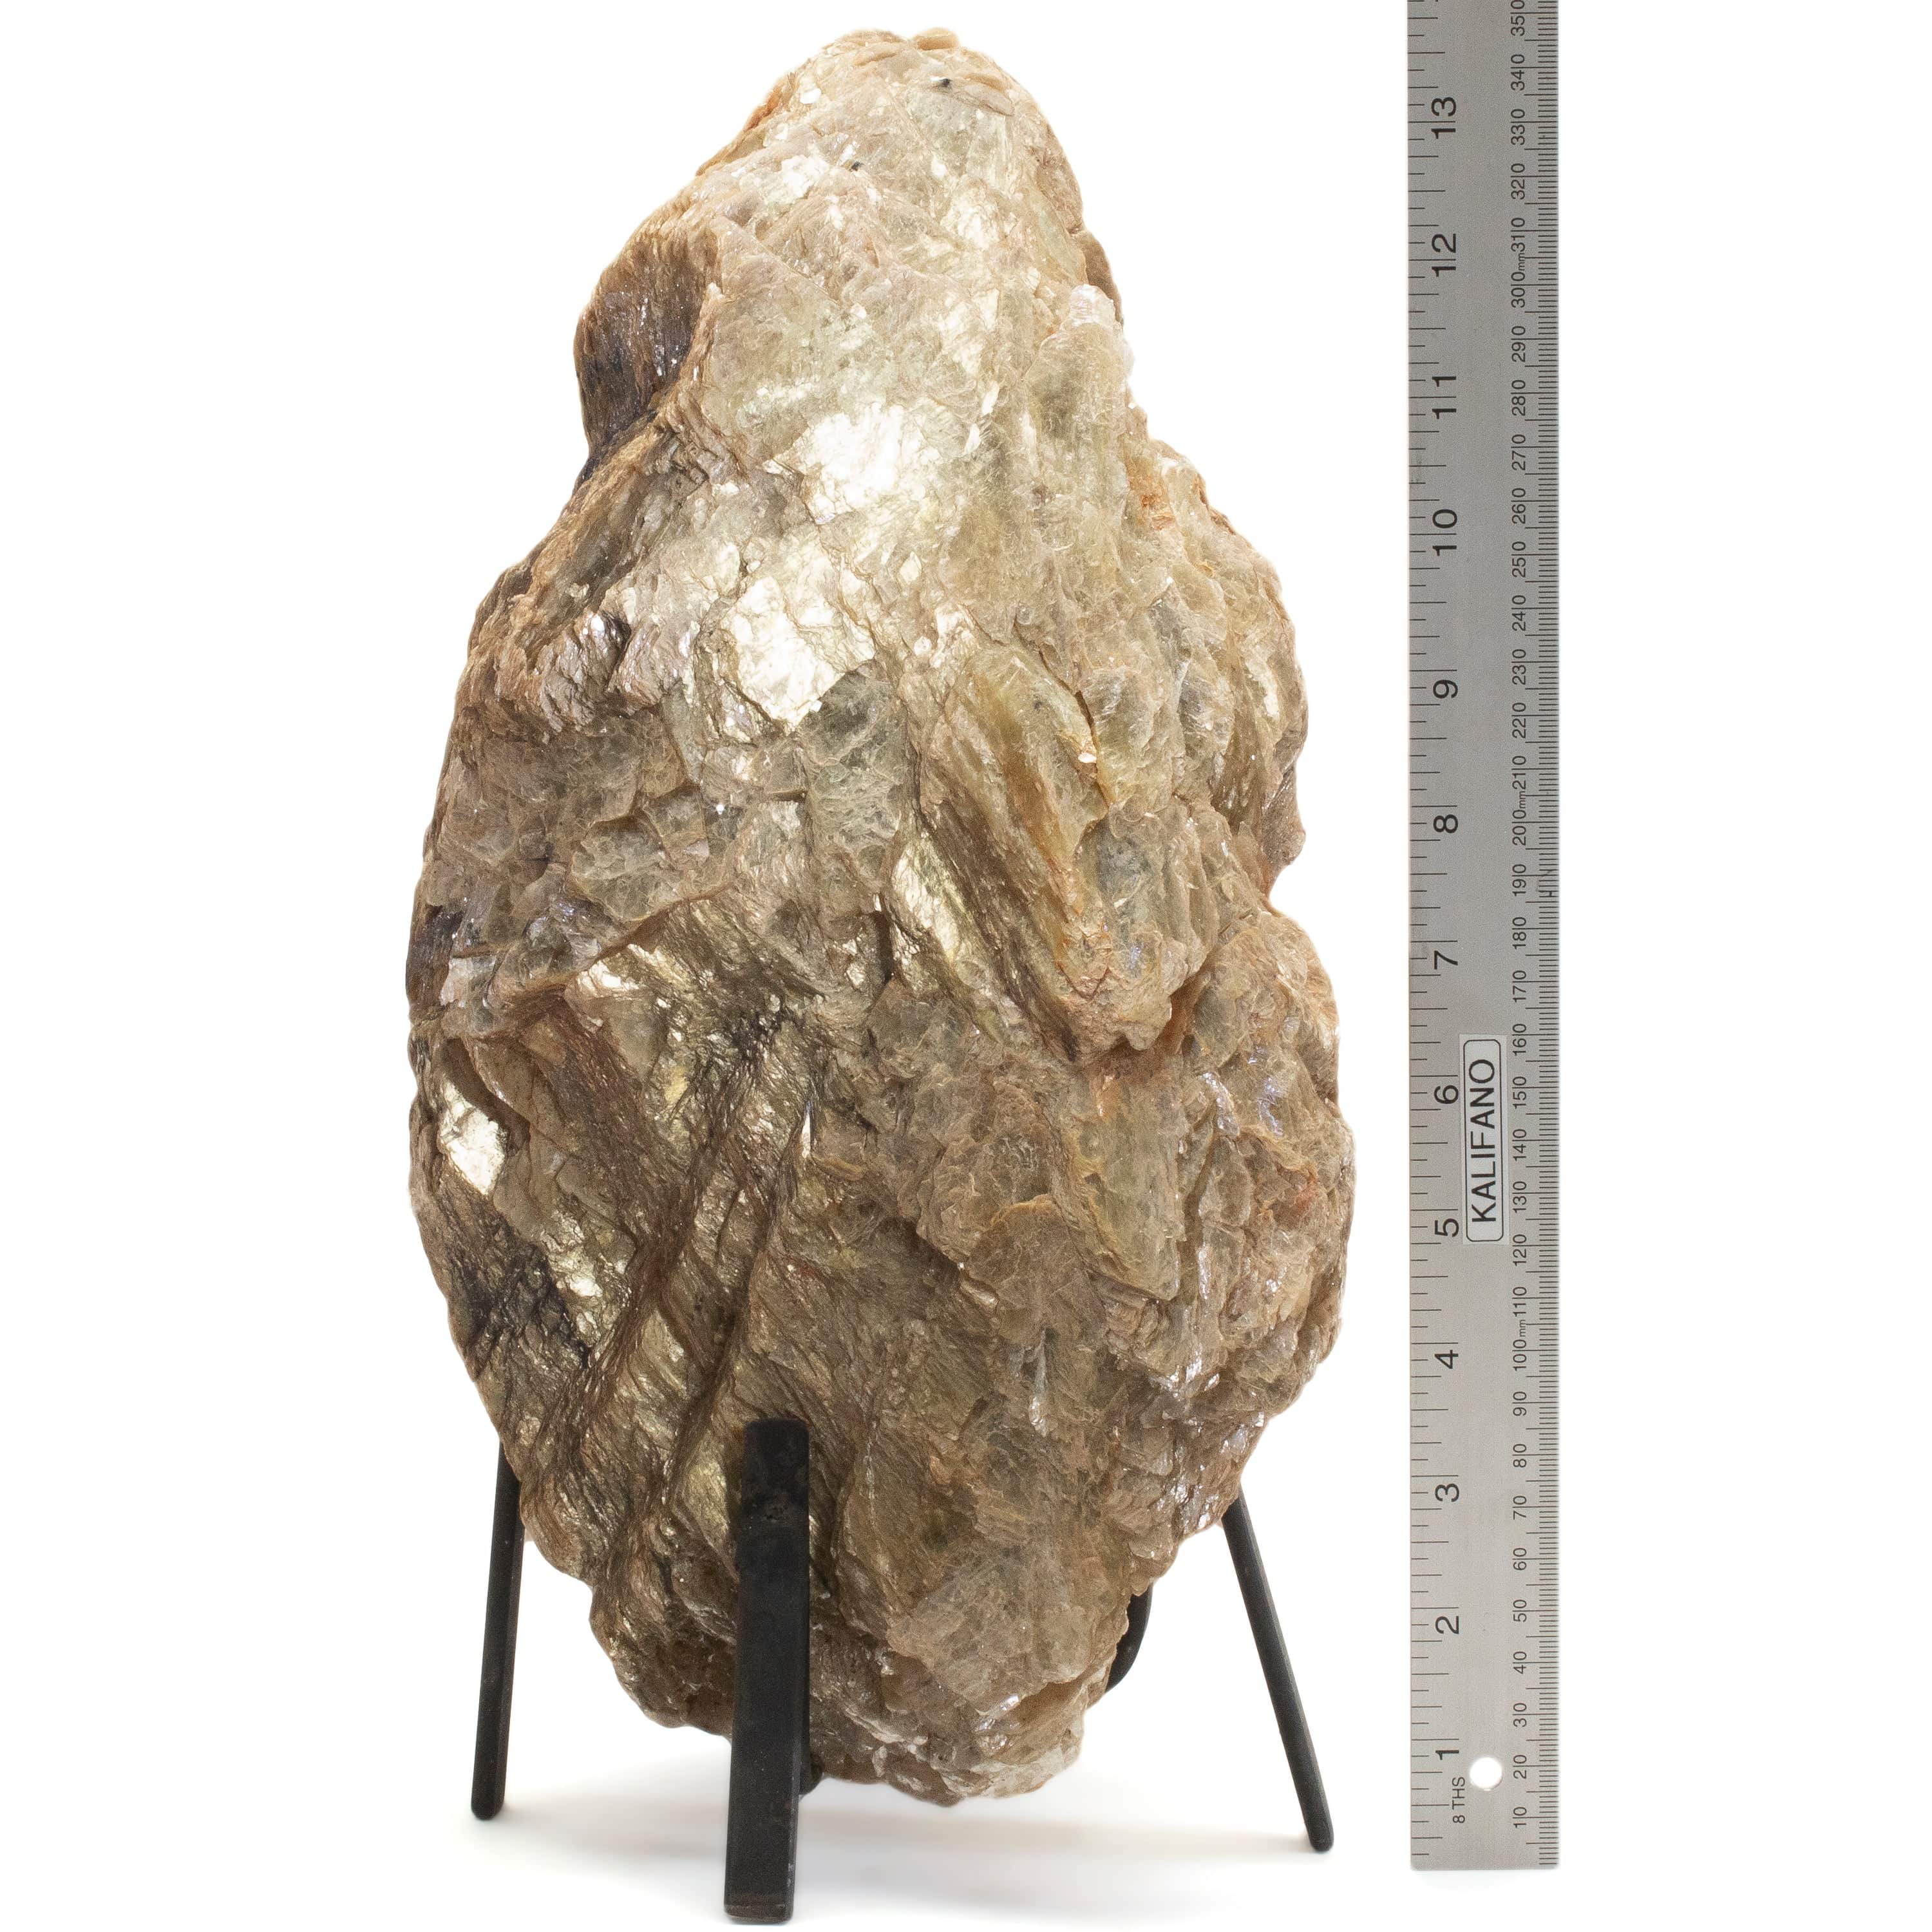 Kalifano Mica Natural Mica on Custom Stand from Brazil - 14" / 18 lbs MC4100.003